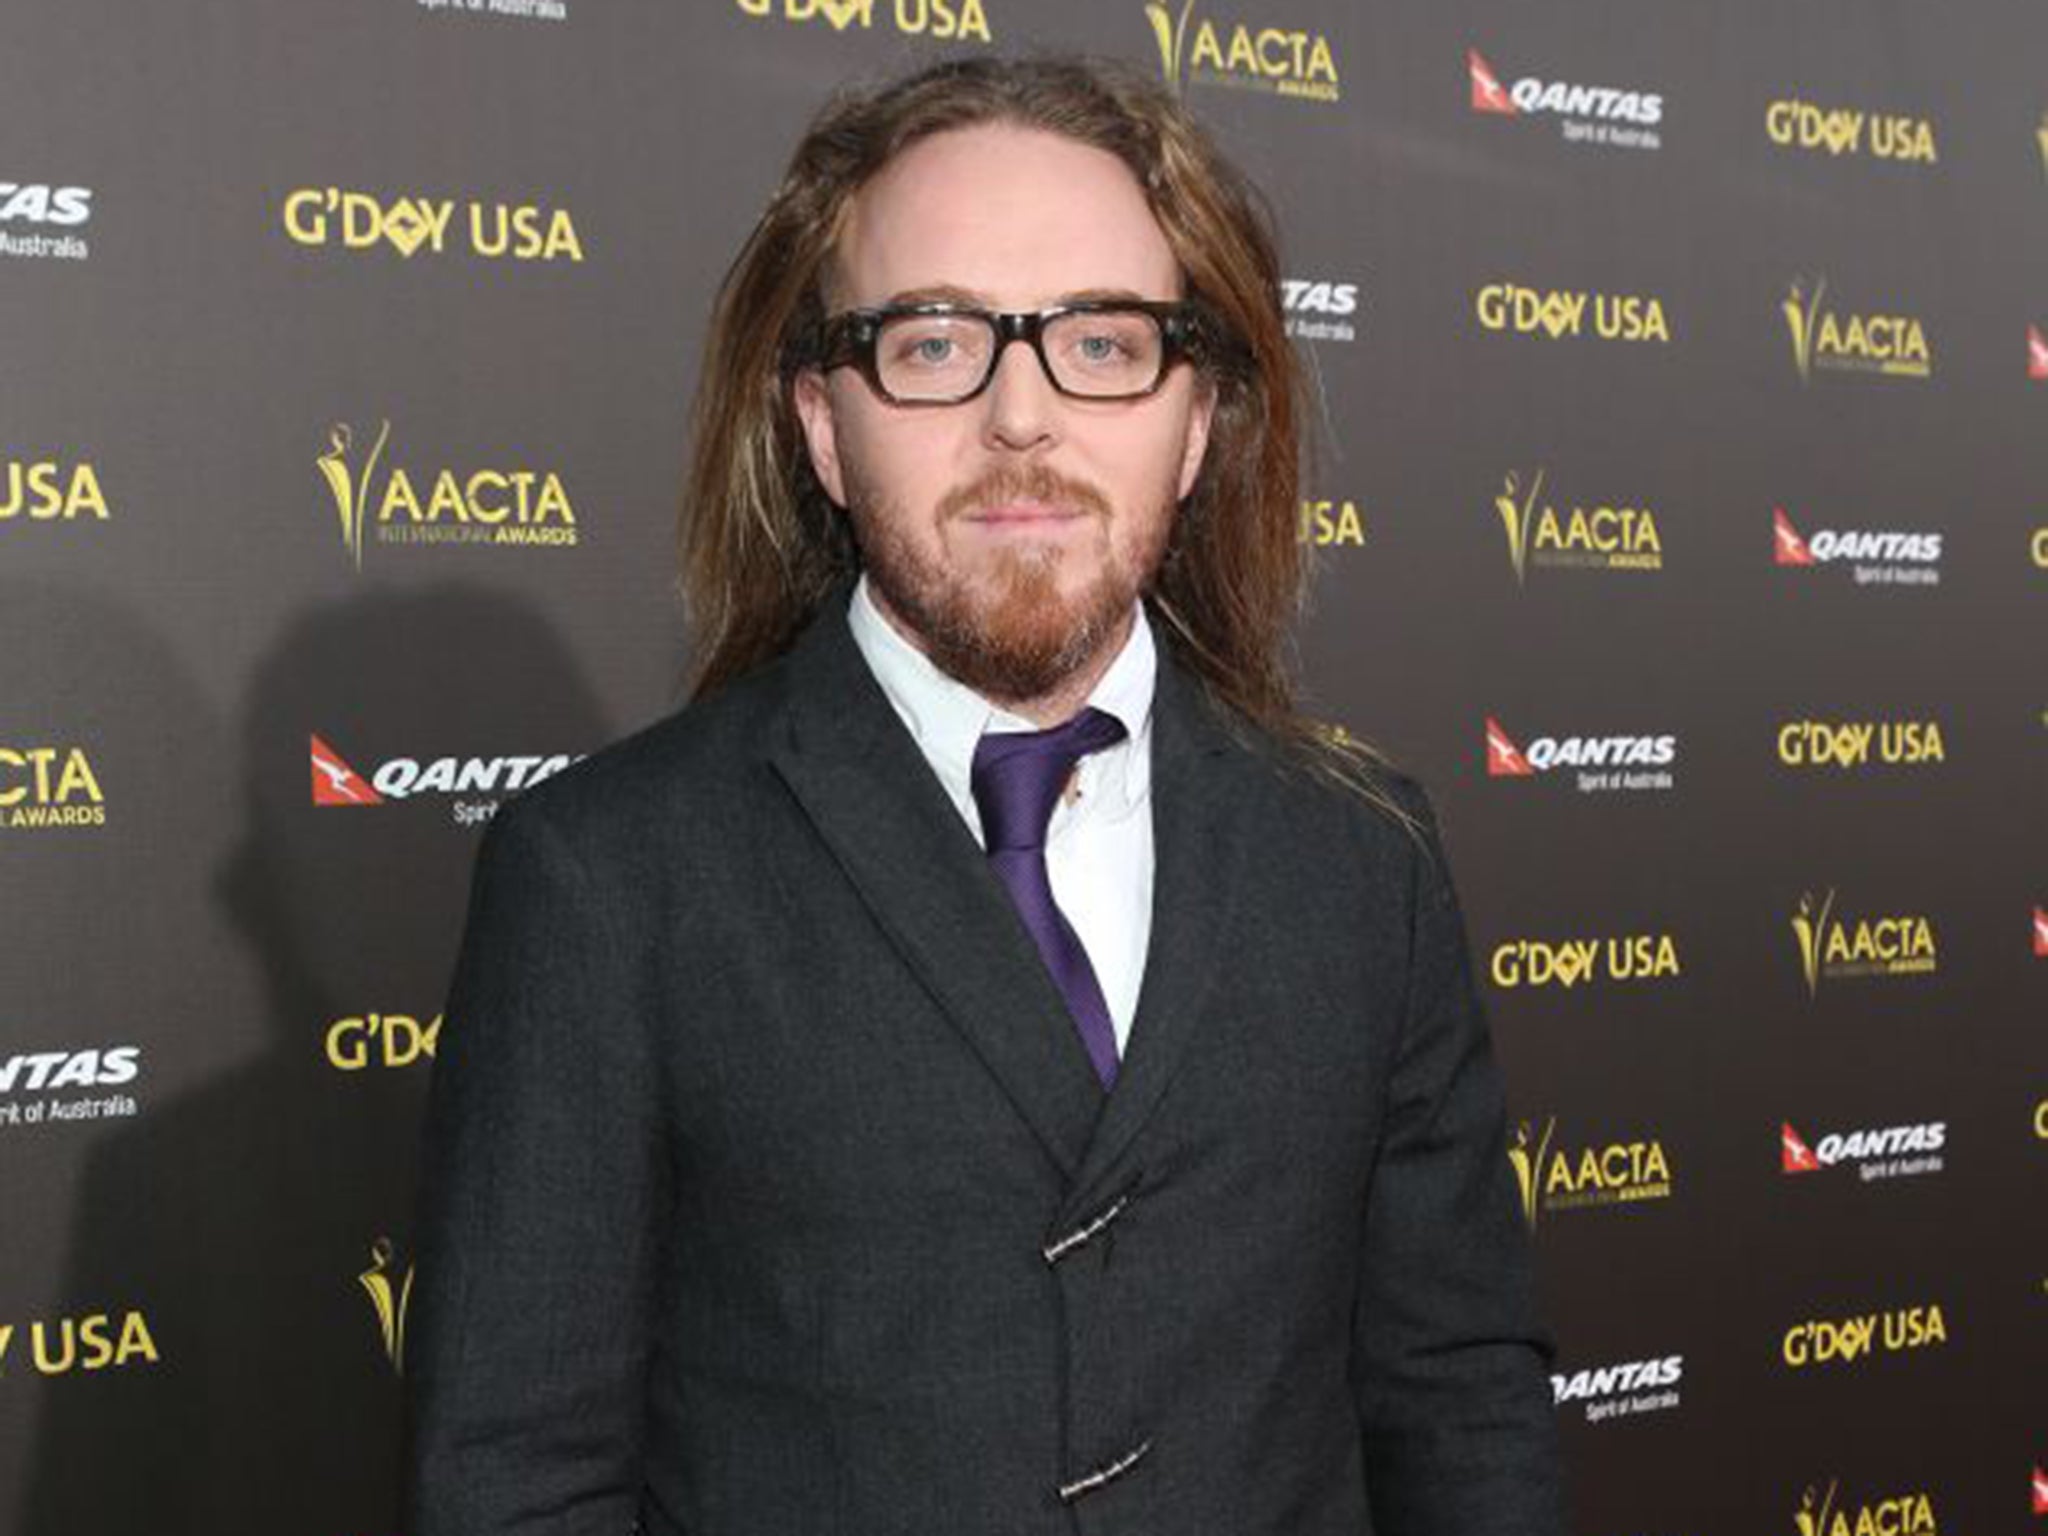 Minchin was born in Northampton in England to Australian parents but was brought up in Perth in Western Australia